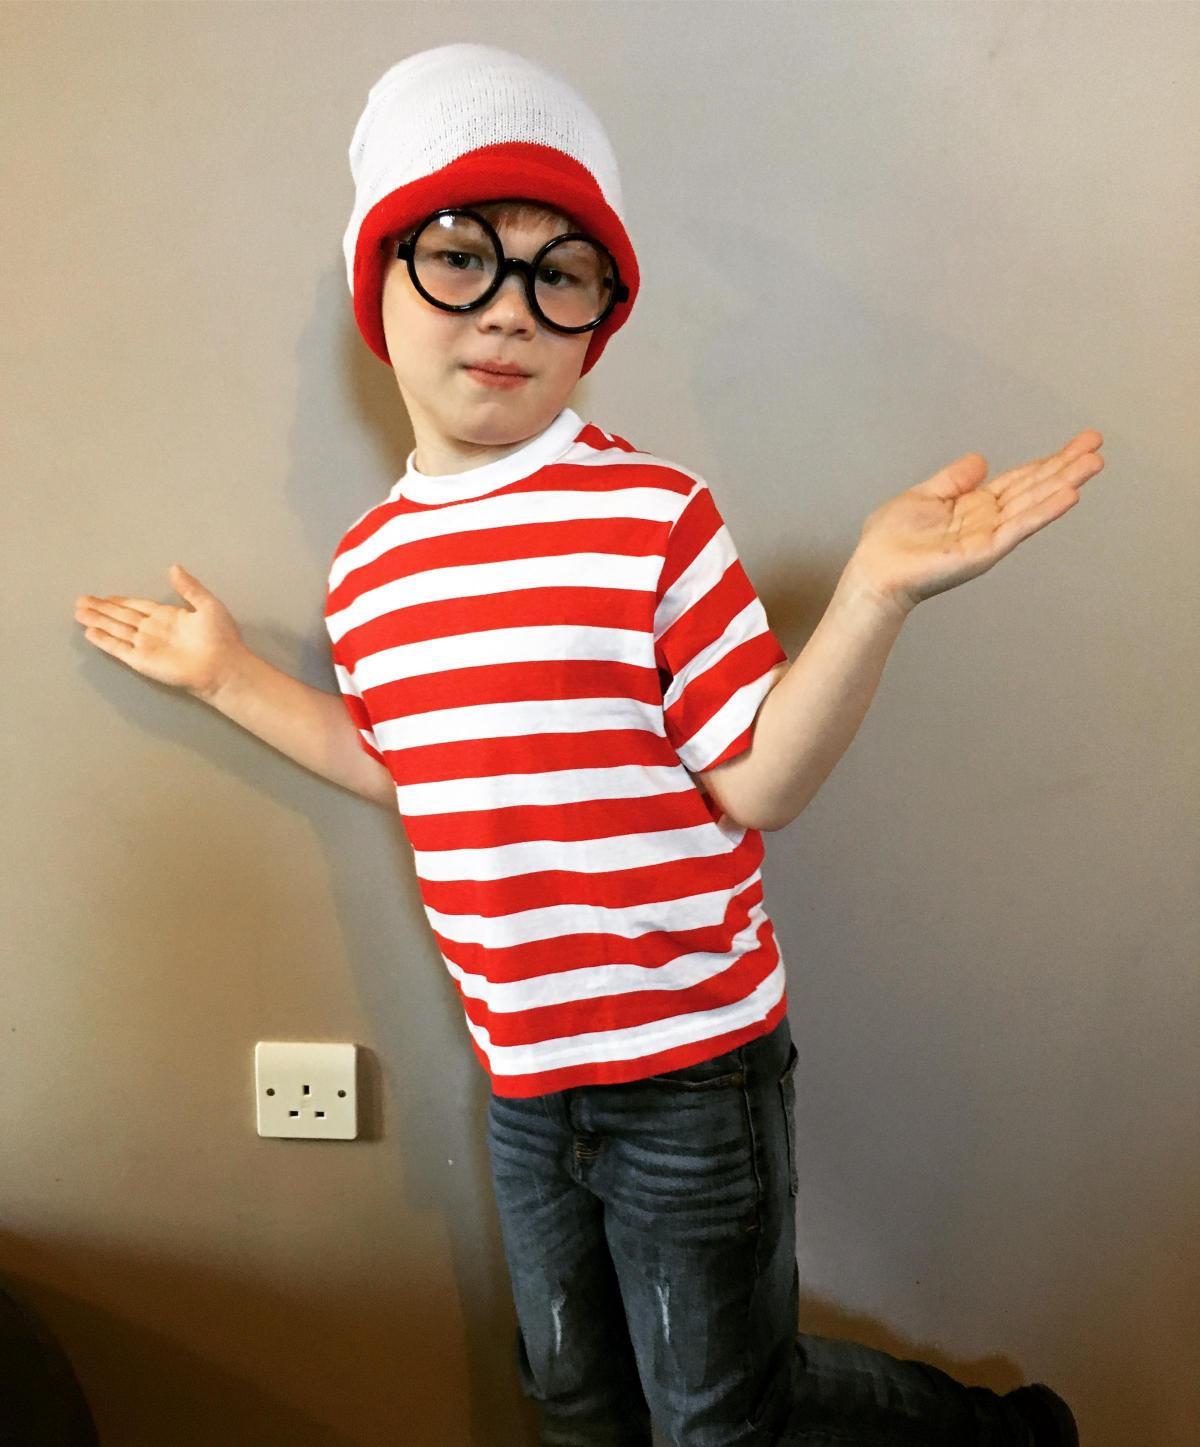 Zoe Brough sent us this World Book Day picture